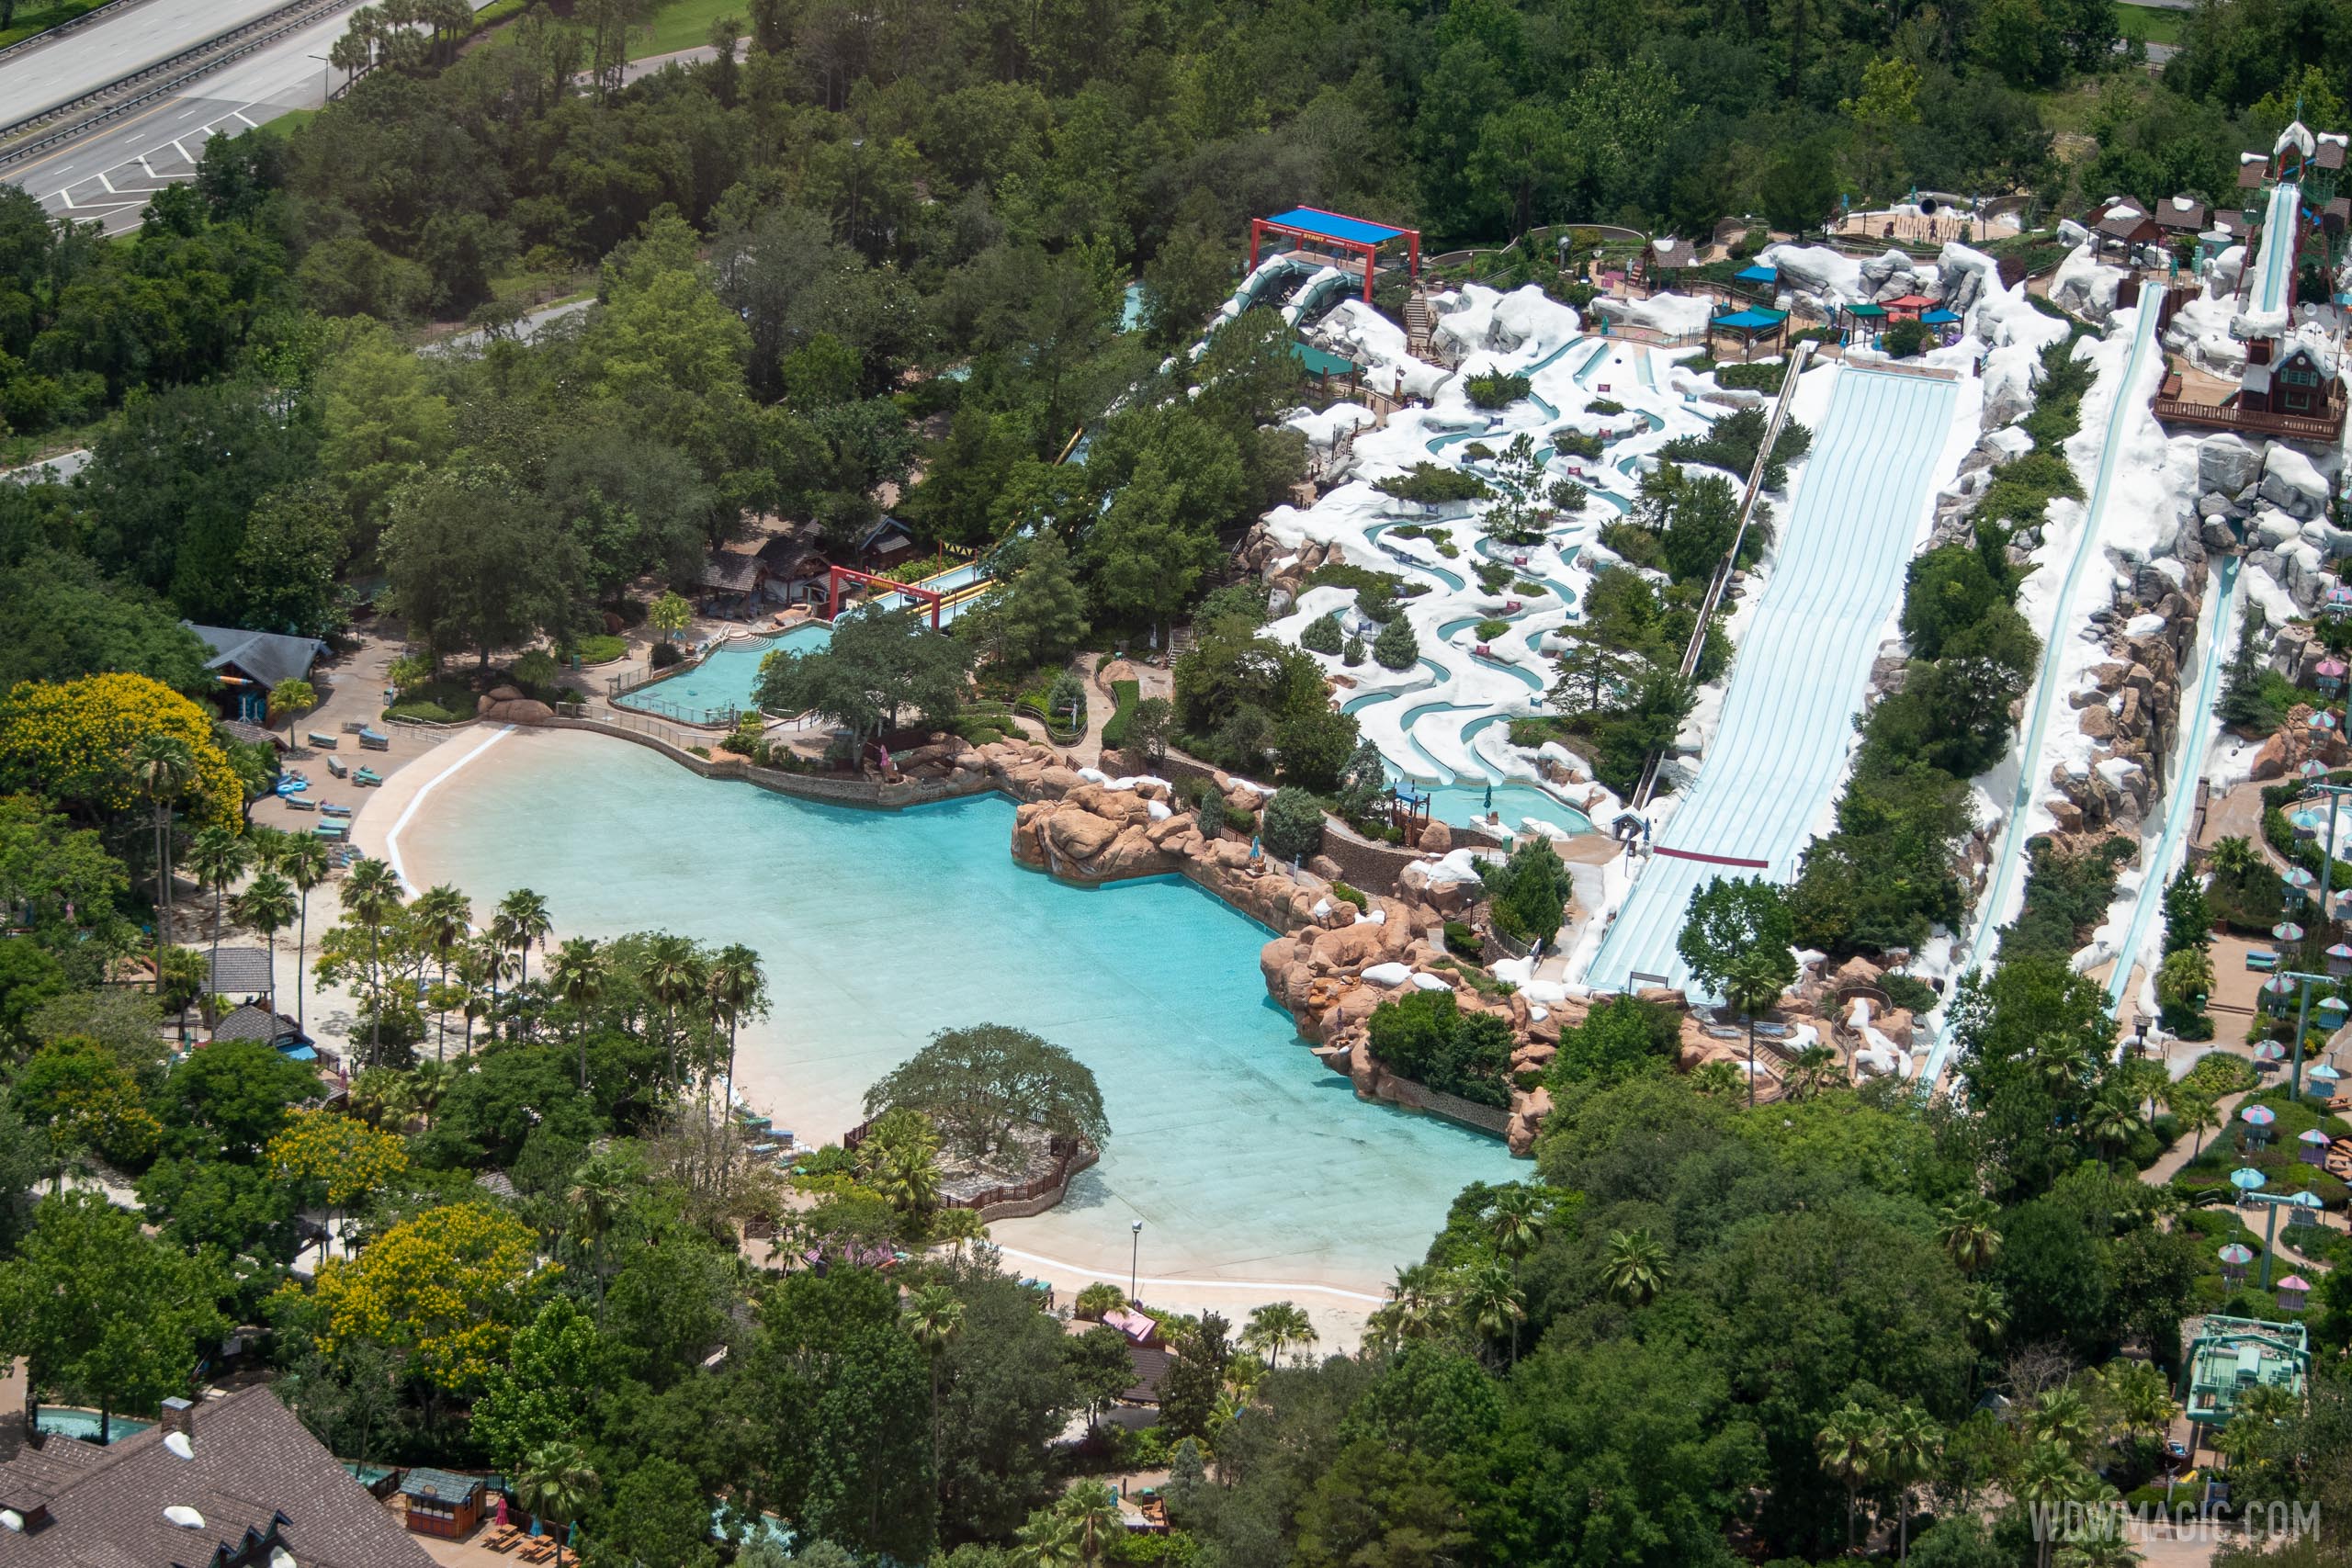 Aerial views of Blizzard Beach and Typhoon Lagoon during COVID19